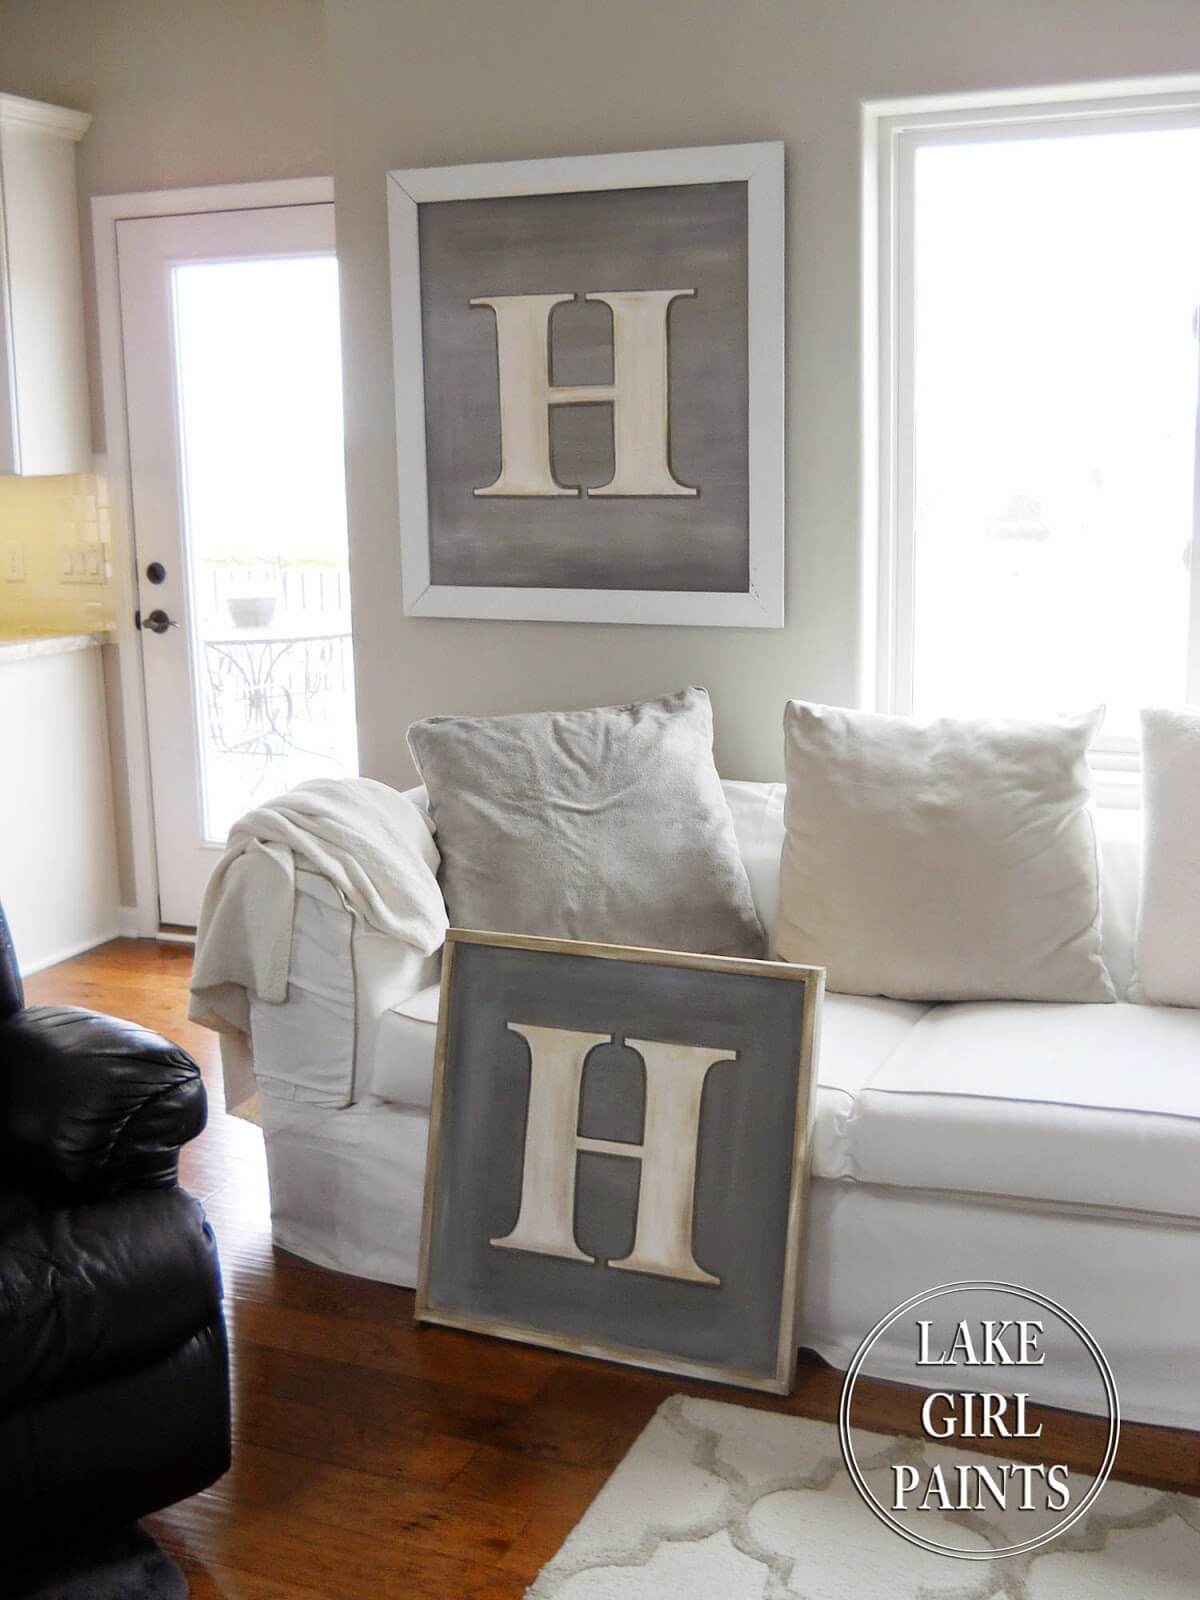 Oversized Initial Letter on Canvas